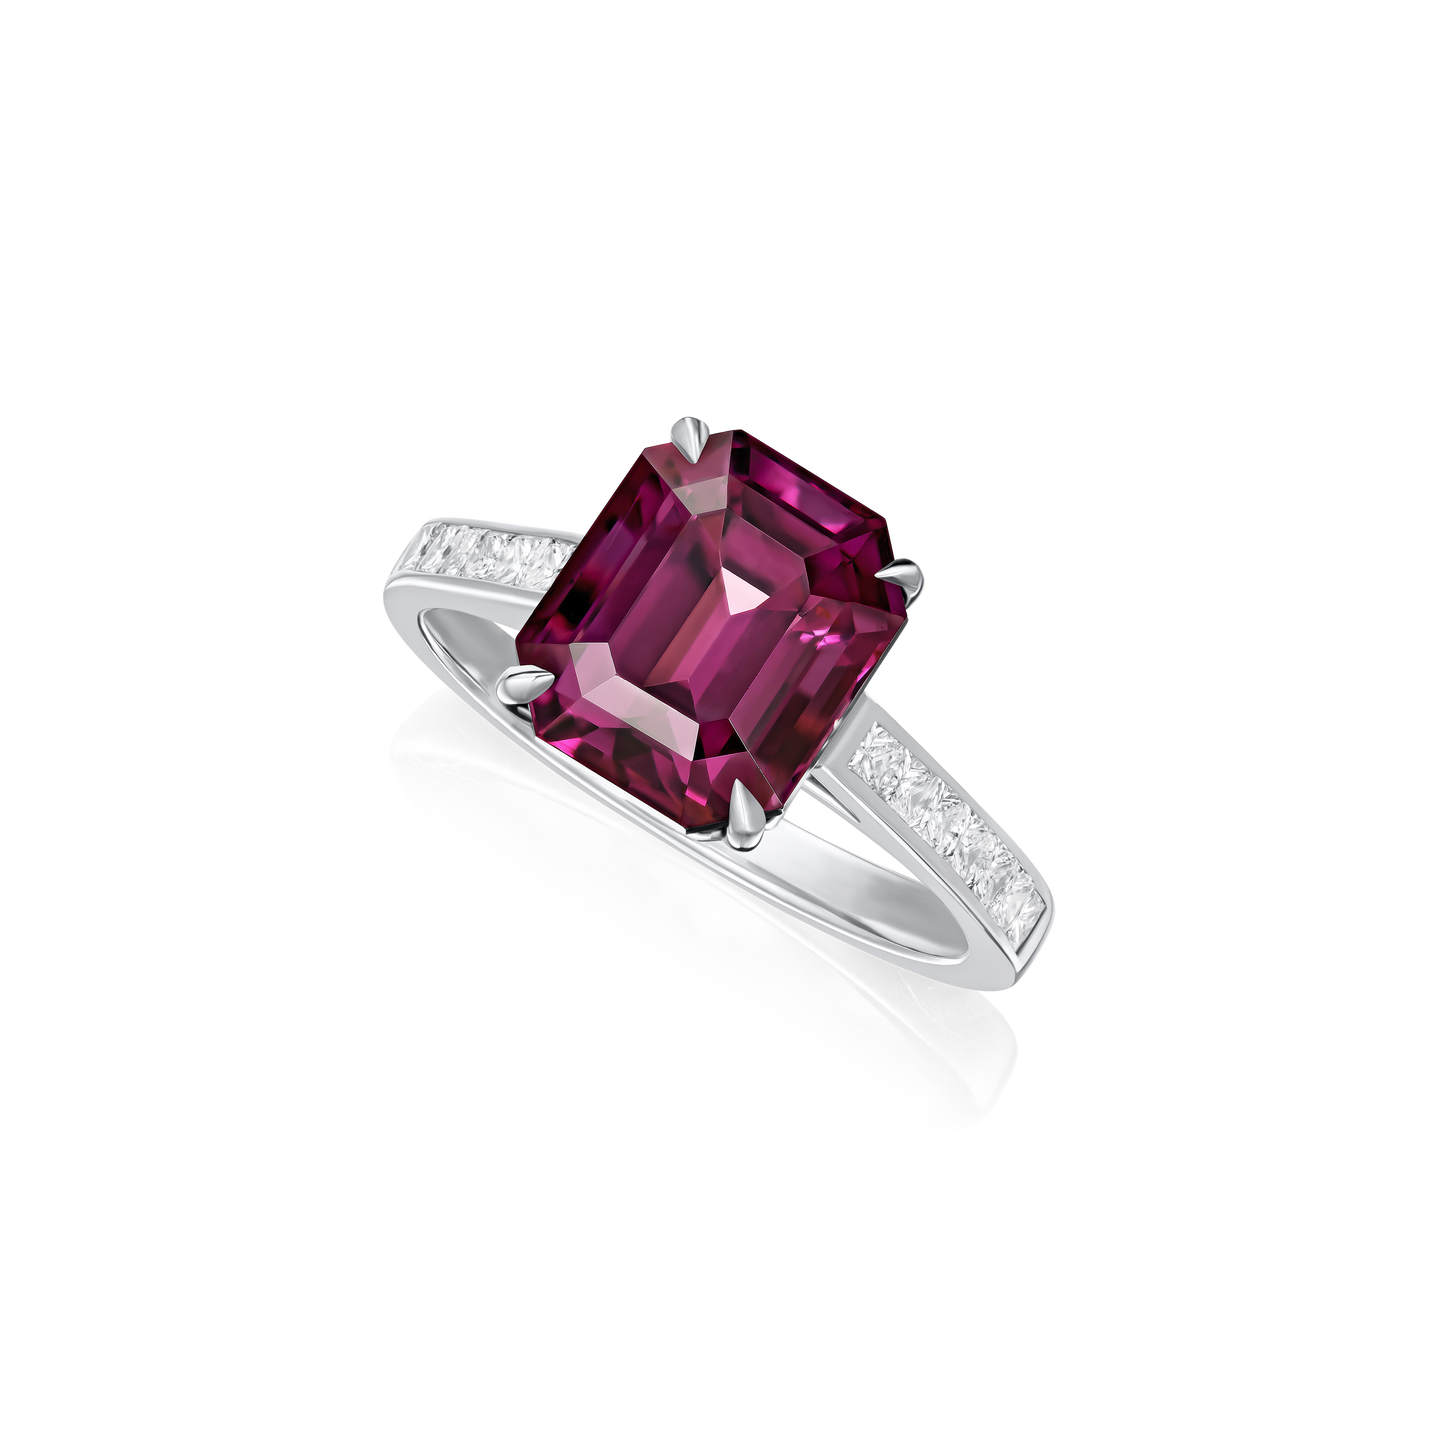 5.25cts Octagonal Cut Purple Spinel and Diamond Ring